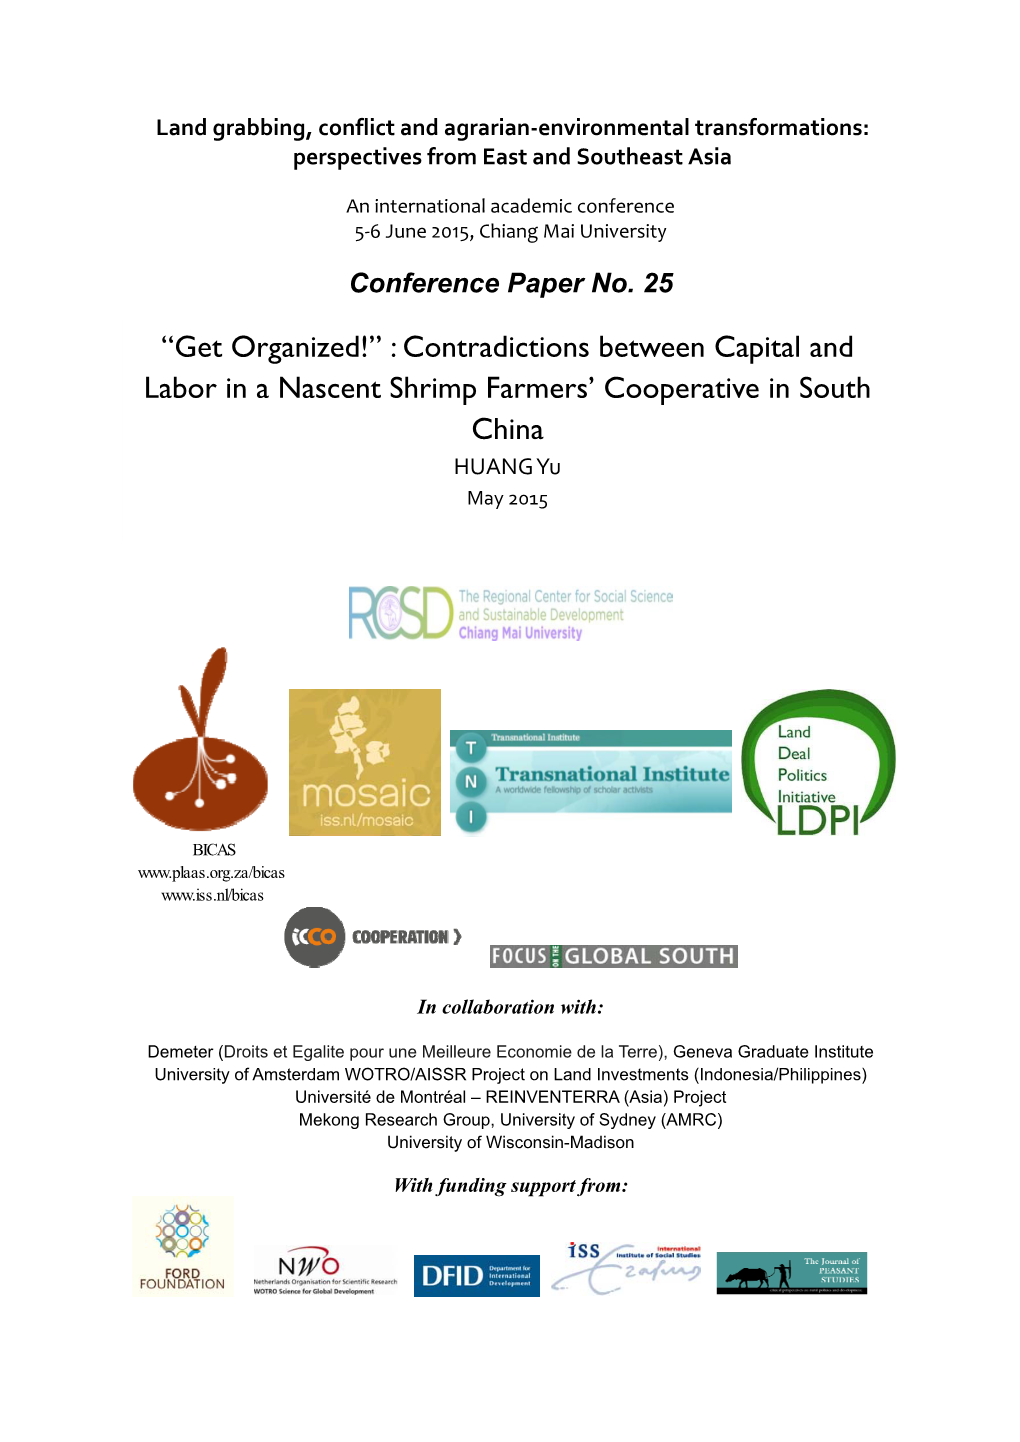 Contradictions Between Capital and Labor in a Nascent Shrimp Farmers’ Cooperative in South China HUANG Yu May 2015